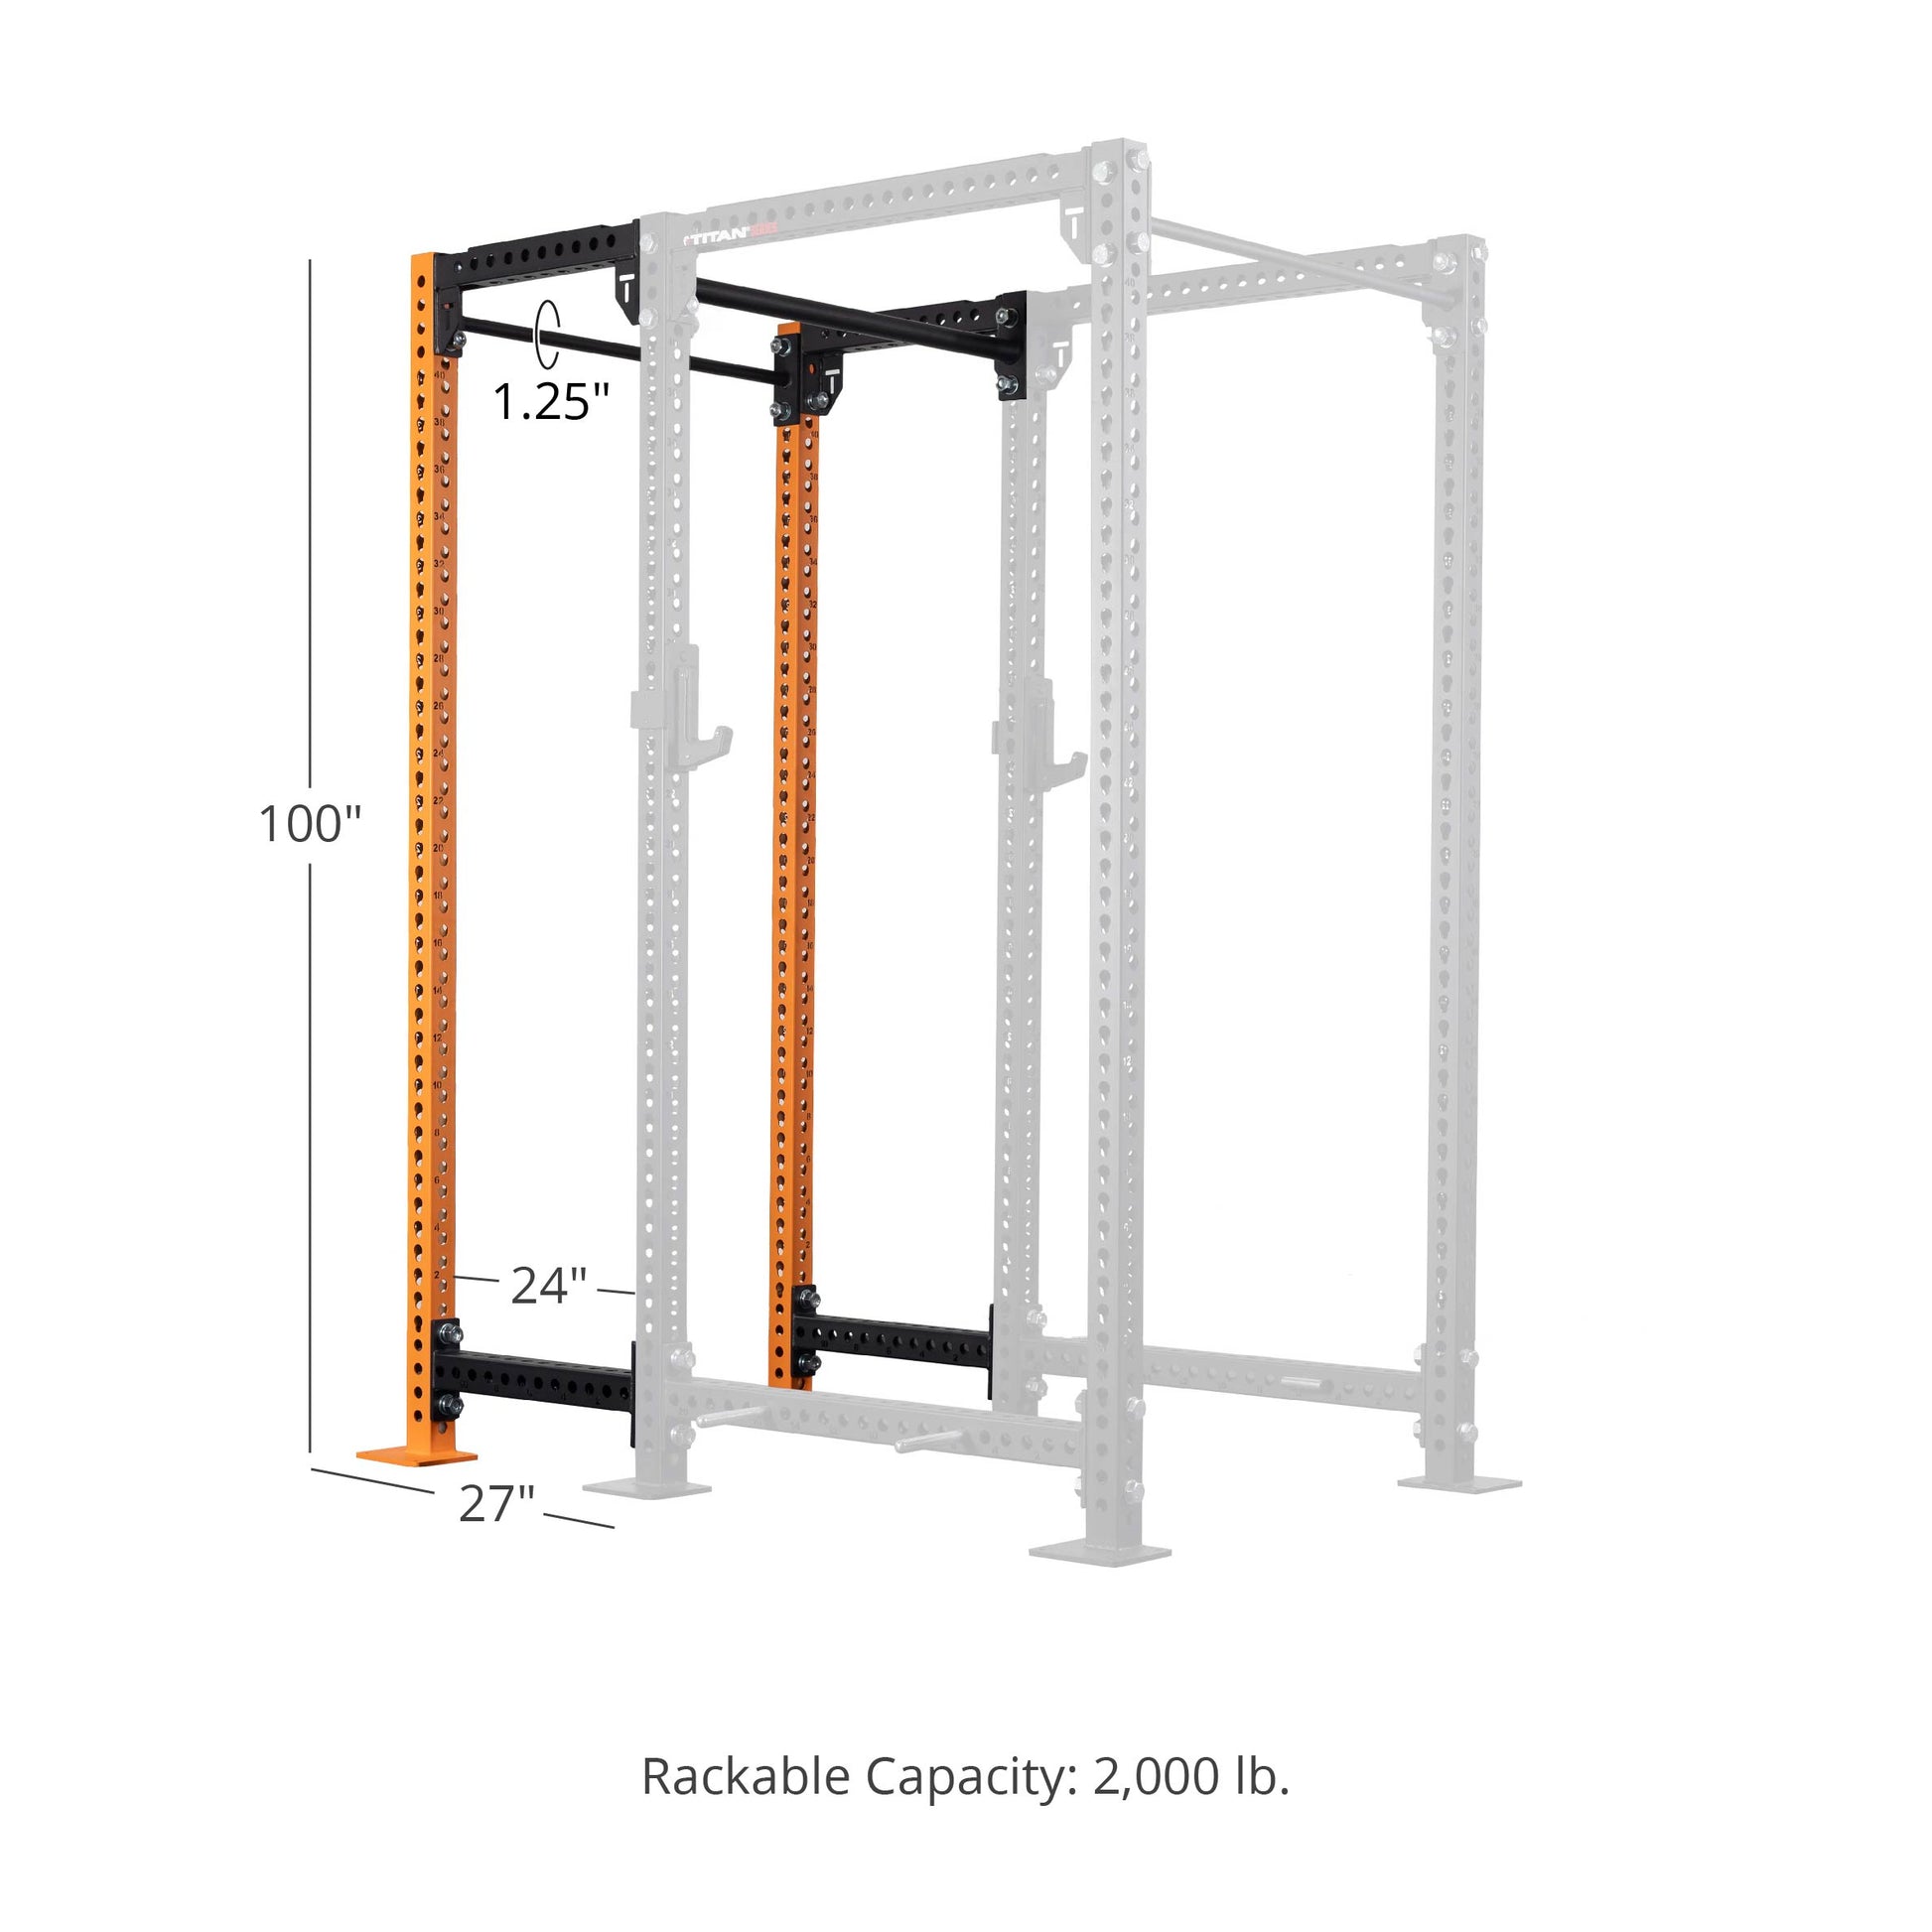 TITAN Series 24" Extension Kit - Extension Color: Orange - Extension Height: 100" - Crossmember: 1.25" Pull-Up Bar | Orange / 100" / 1.25" Pull-Up Bar